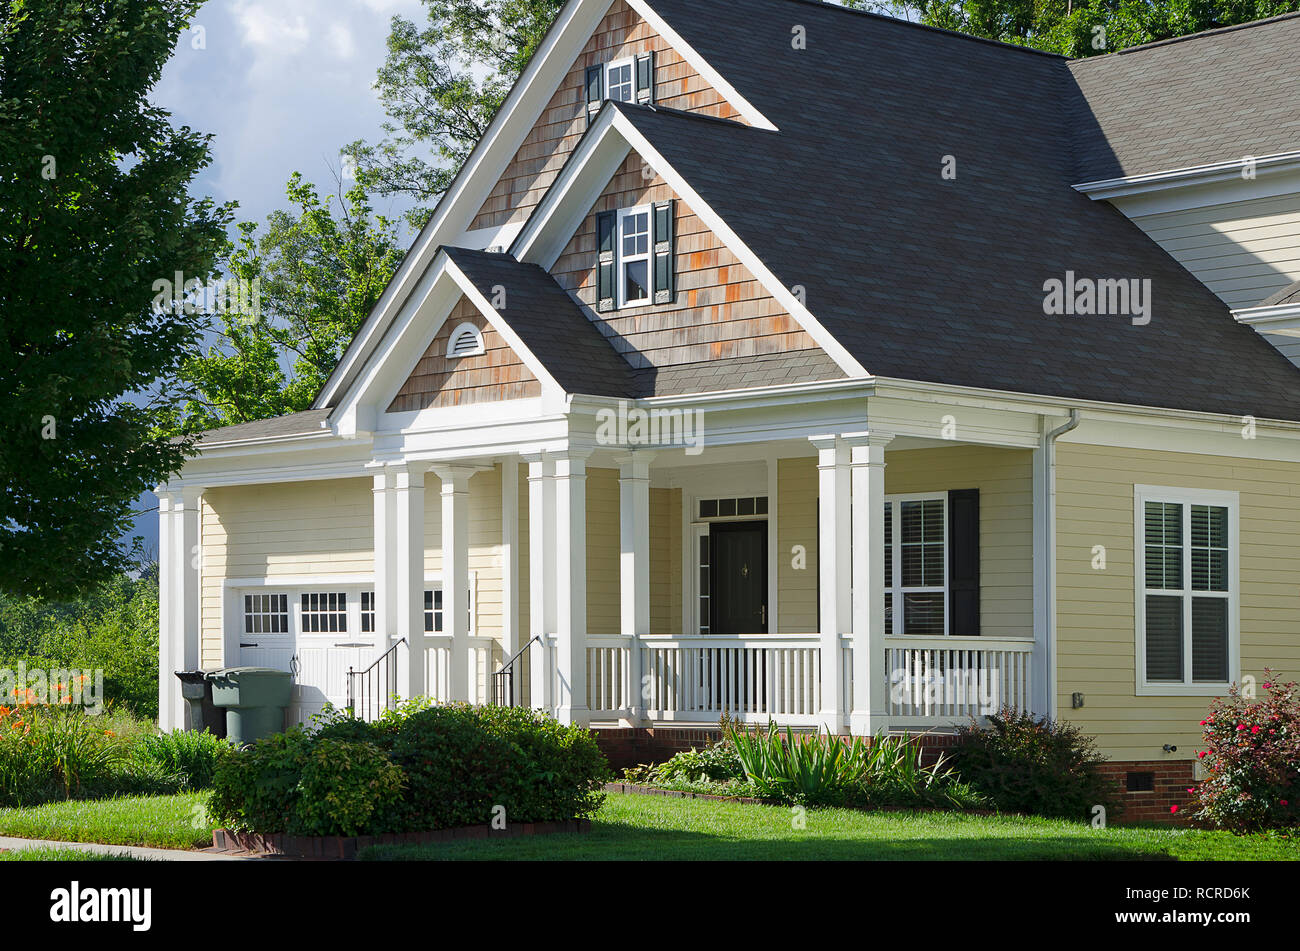 Exterior Of A New Bungalow Cottage Style Home Stock Photo